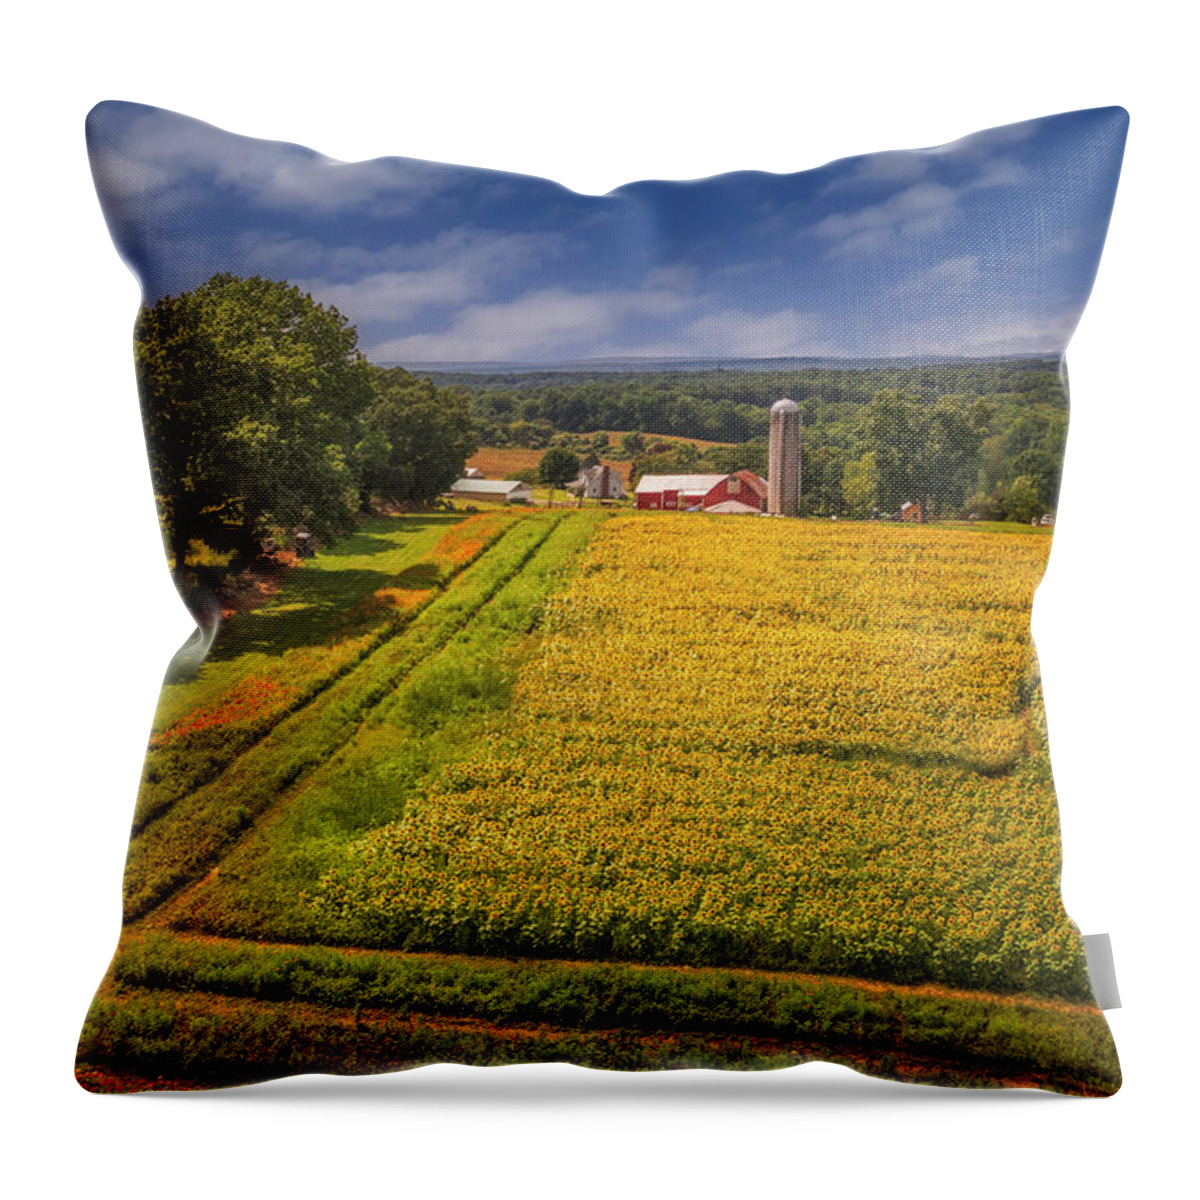 Sunflower Field Throw Pillow featuring the photograph Sunflower Fileds Aerial by Susan Candelario